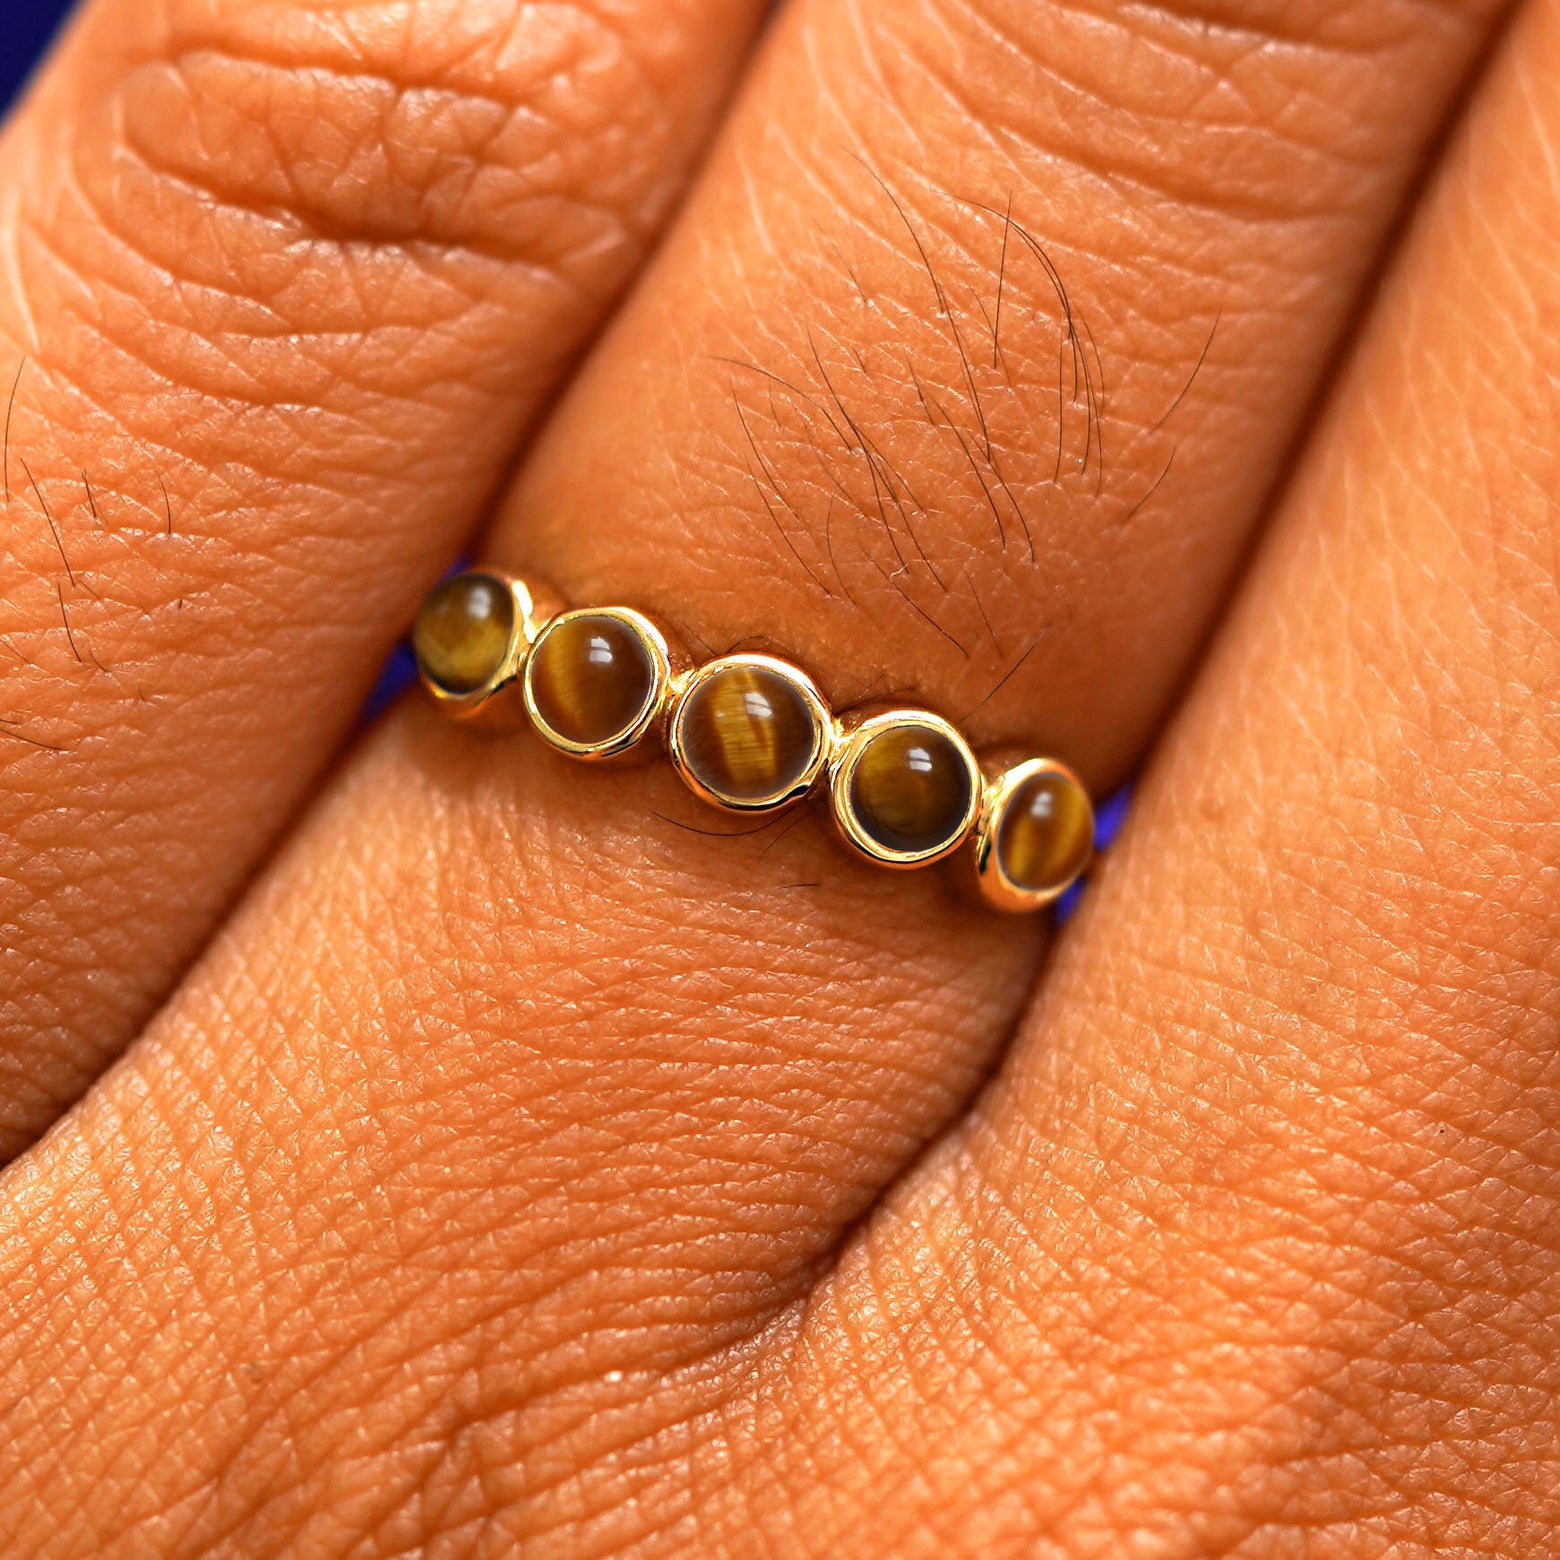 Close up view of a model's hand wearing a yellow gold 5 Gemstones Ring in tiger eye